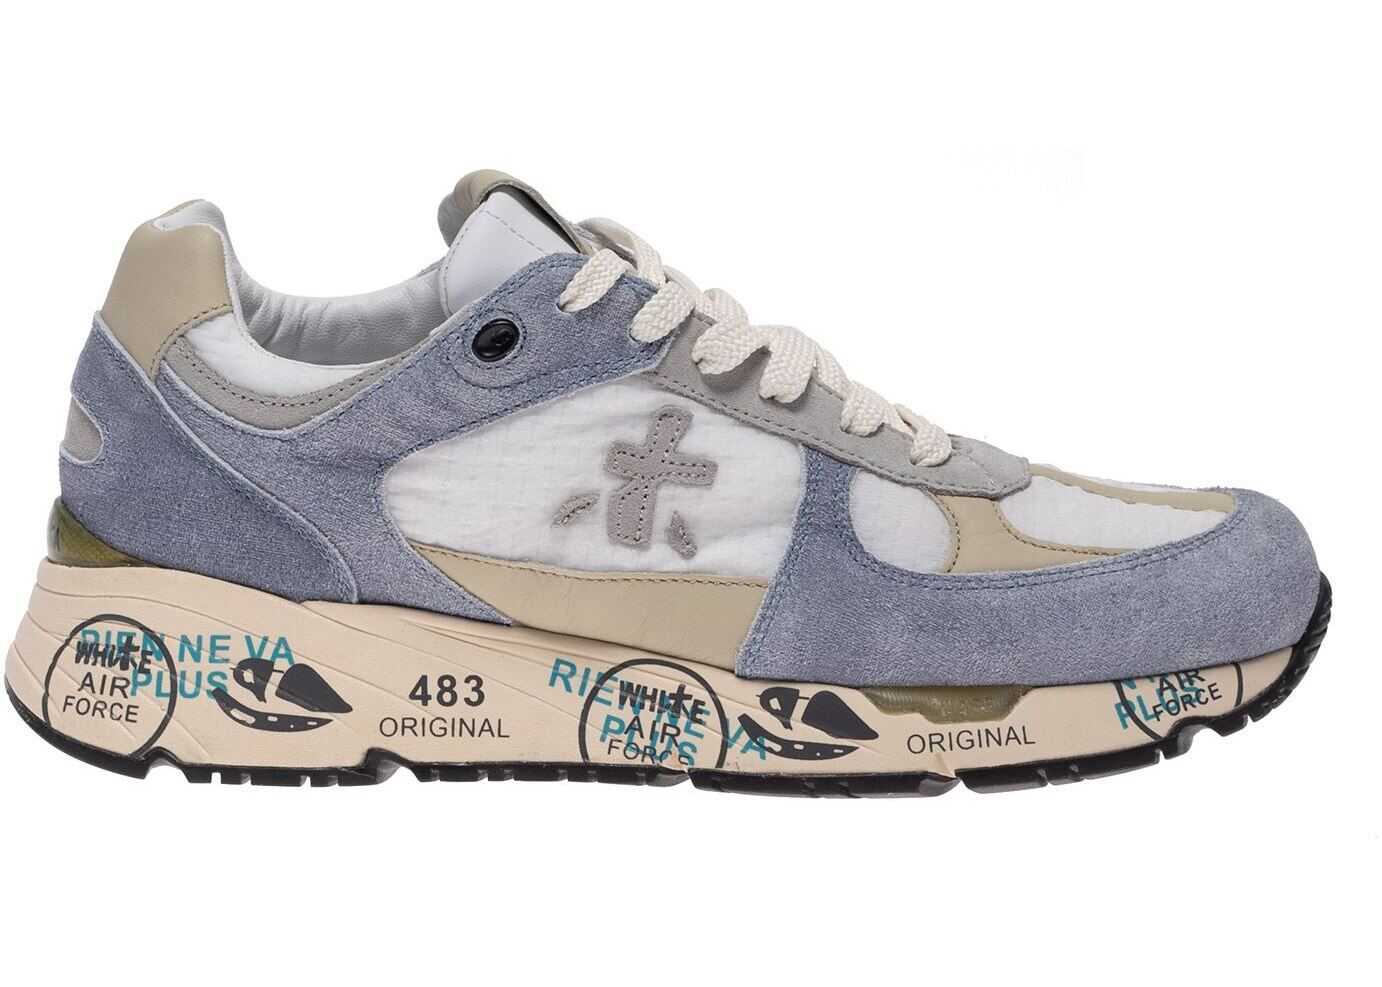 Premiata Mase Suede Sneakers In Grey White And Beige MASE 4550 Light Blue